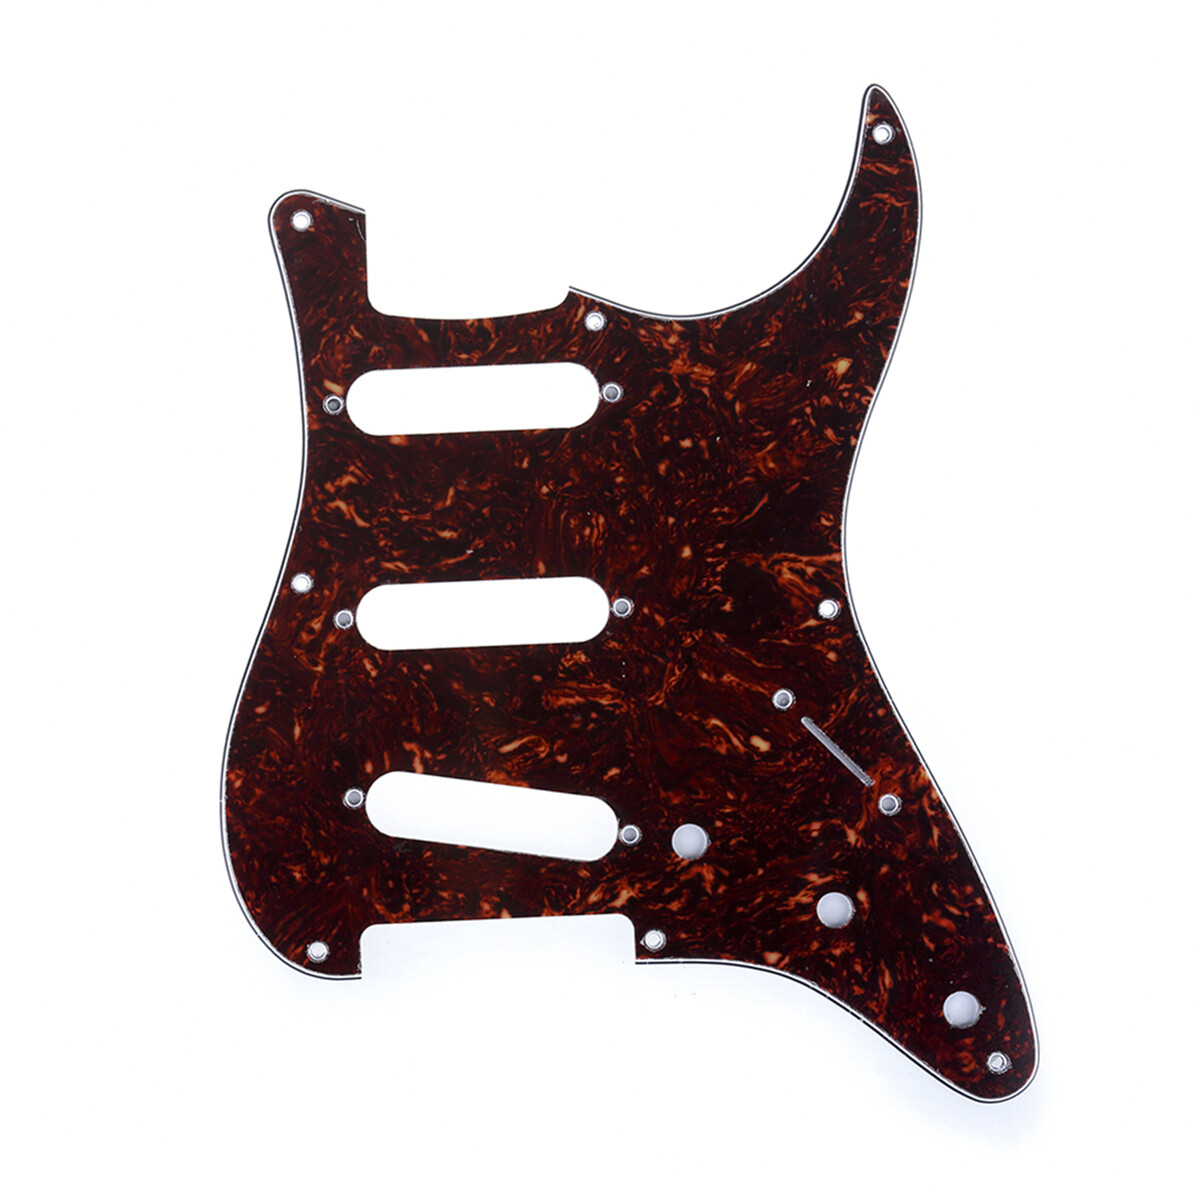 Brio 8-Hole 57 Vintage Style Strat SSS Pickguard for American Stratocaster, 4 ply Modern Brown Tortoise